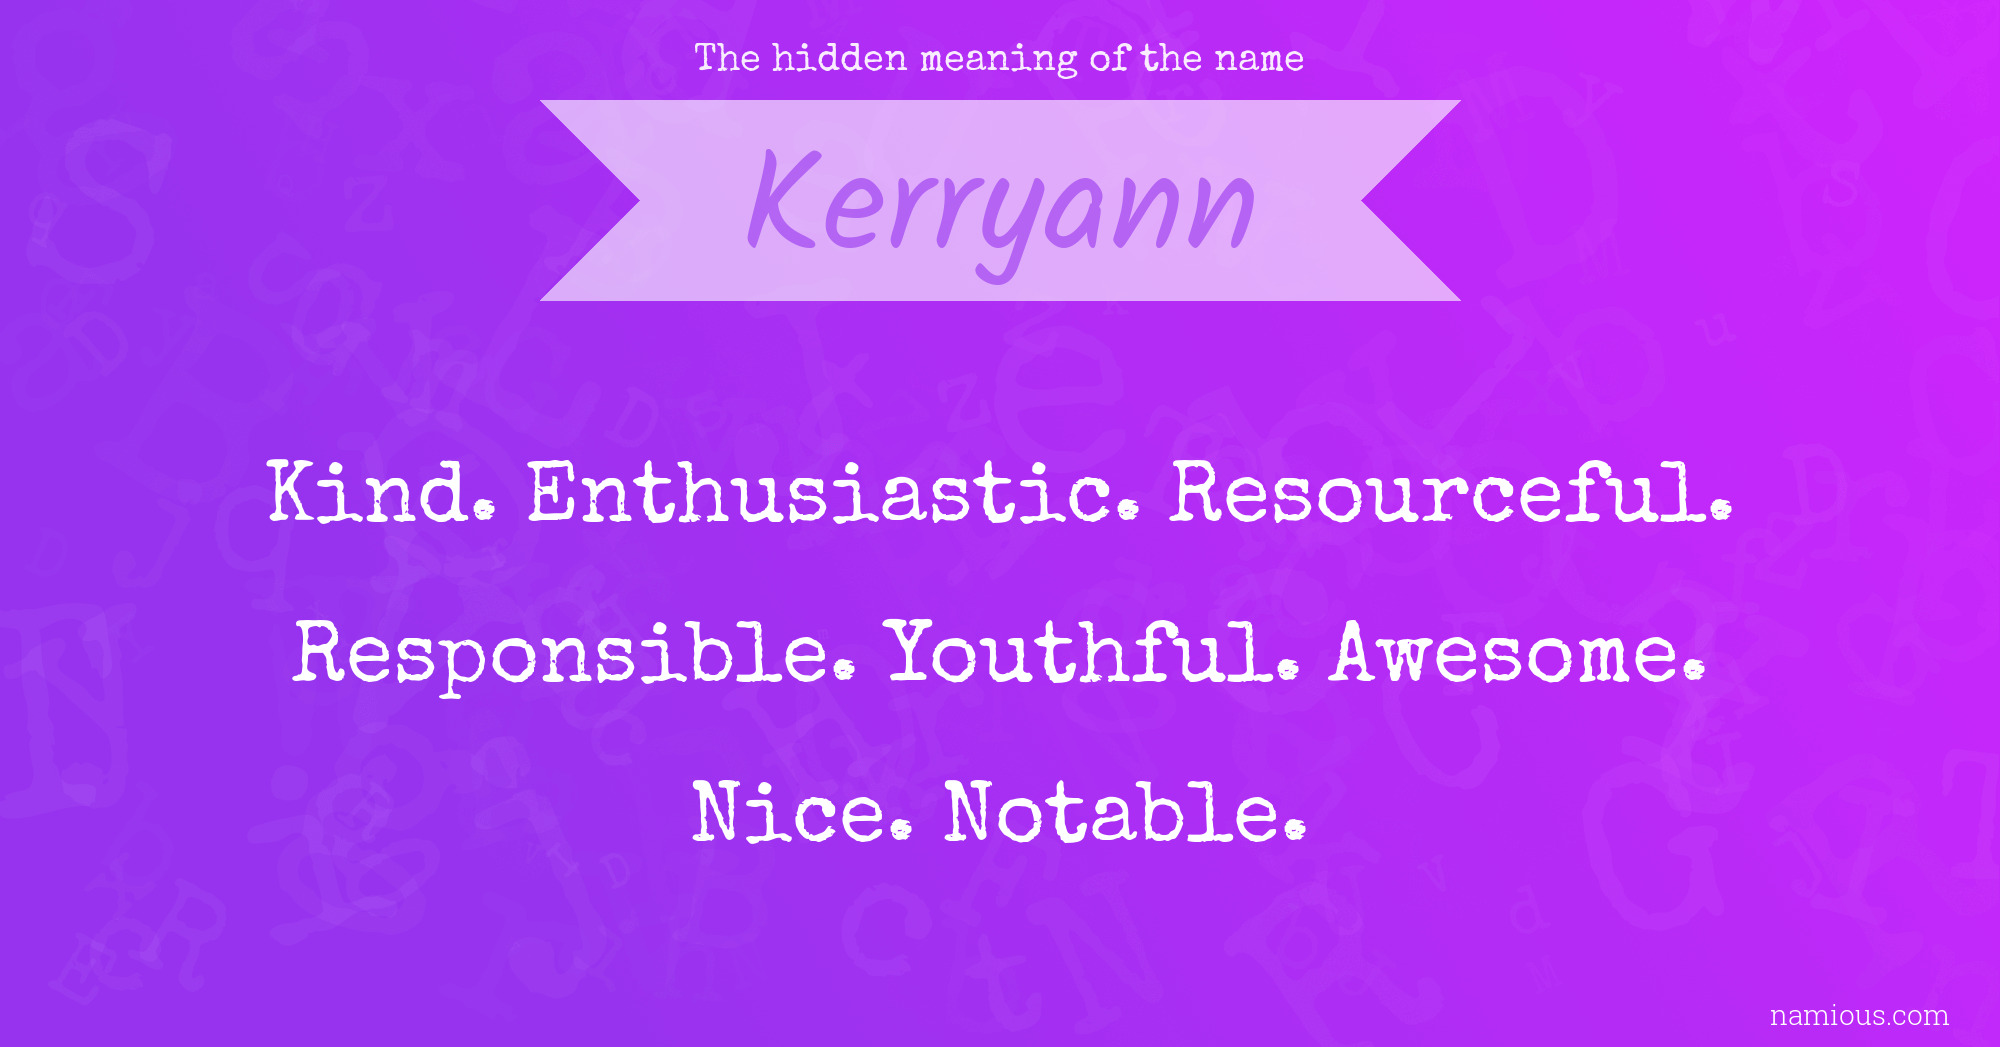 The hidden meaning of the name Kerryann